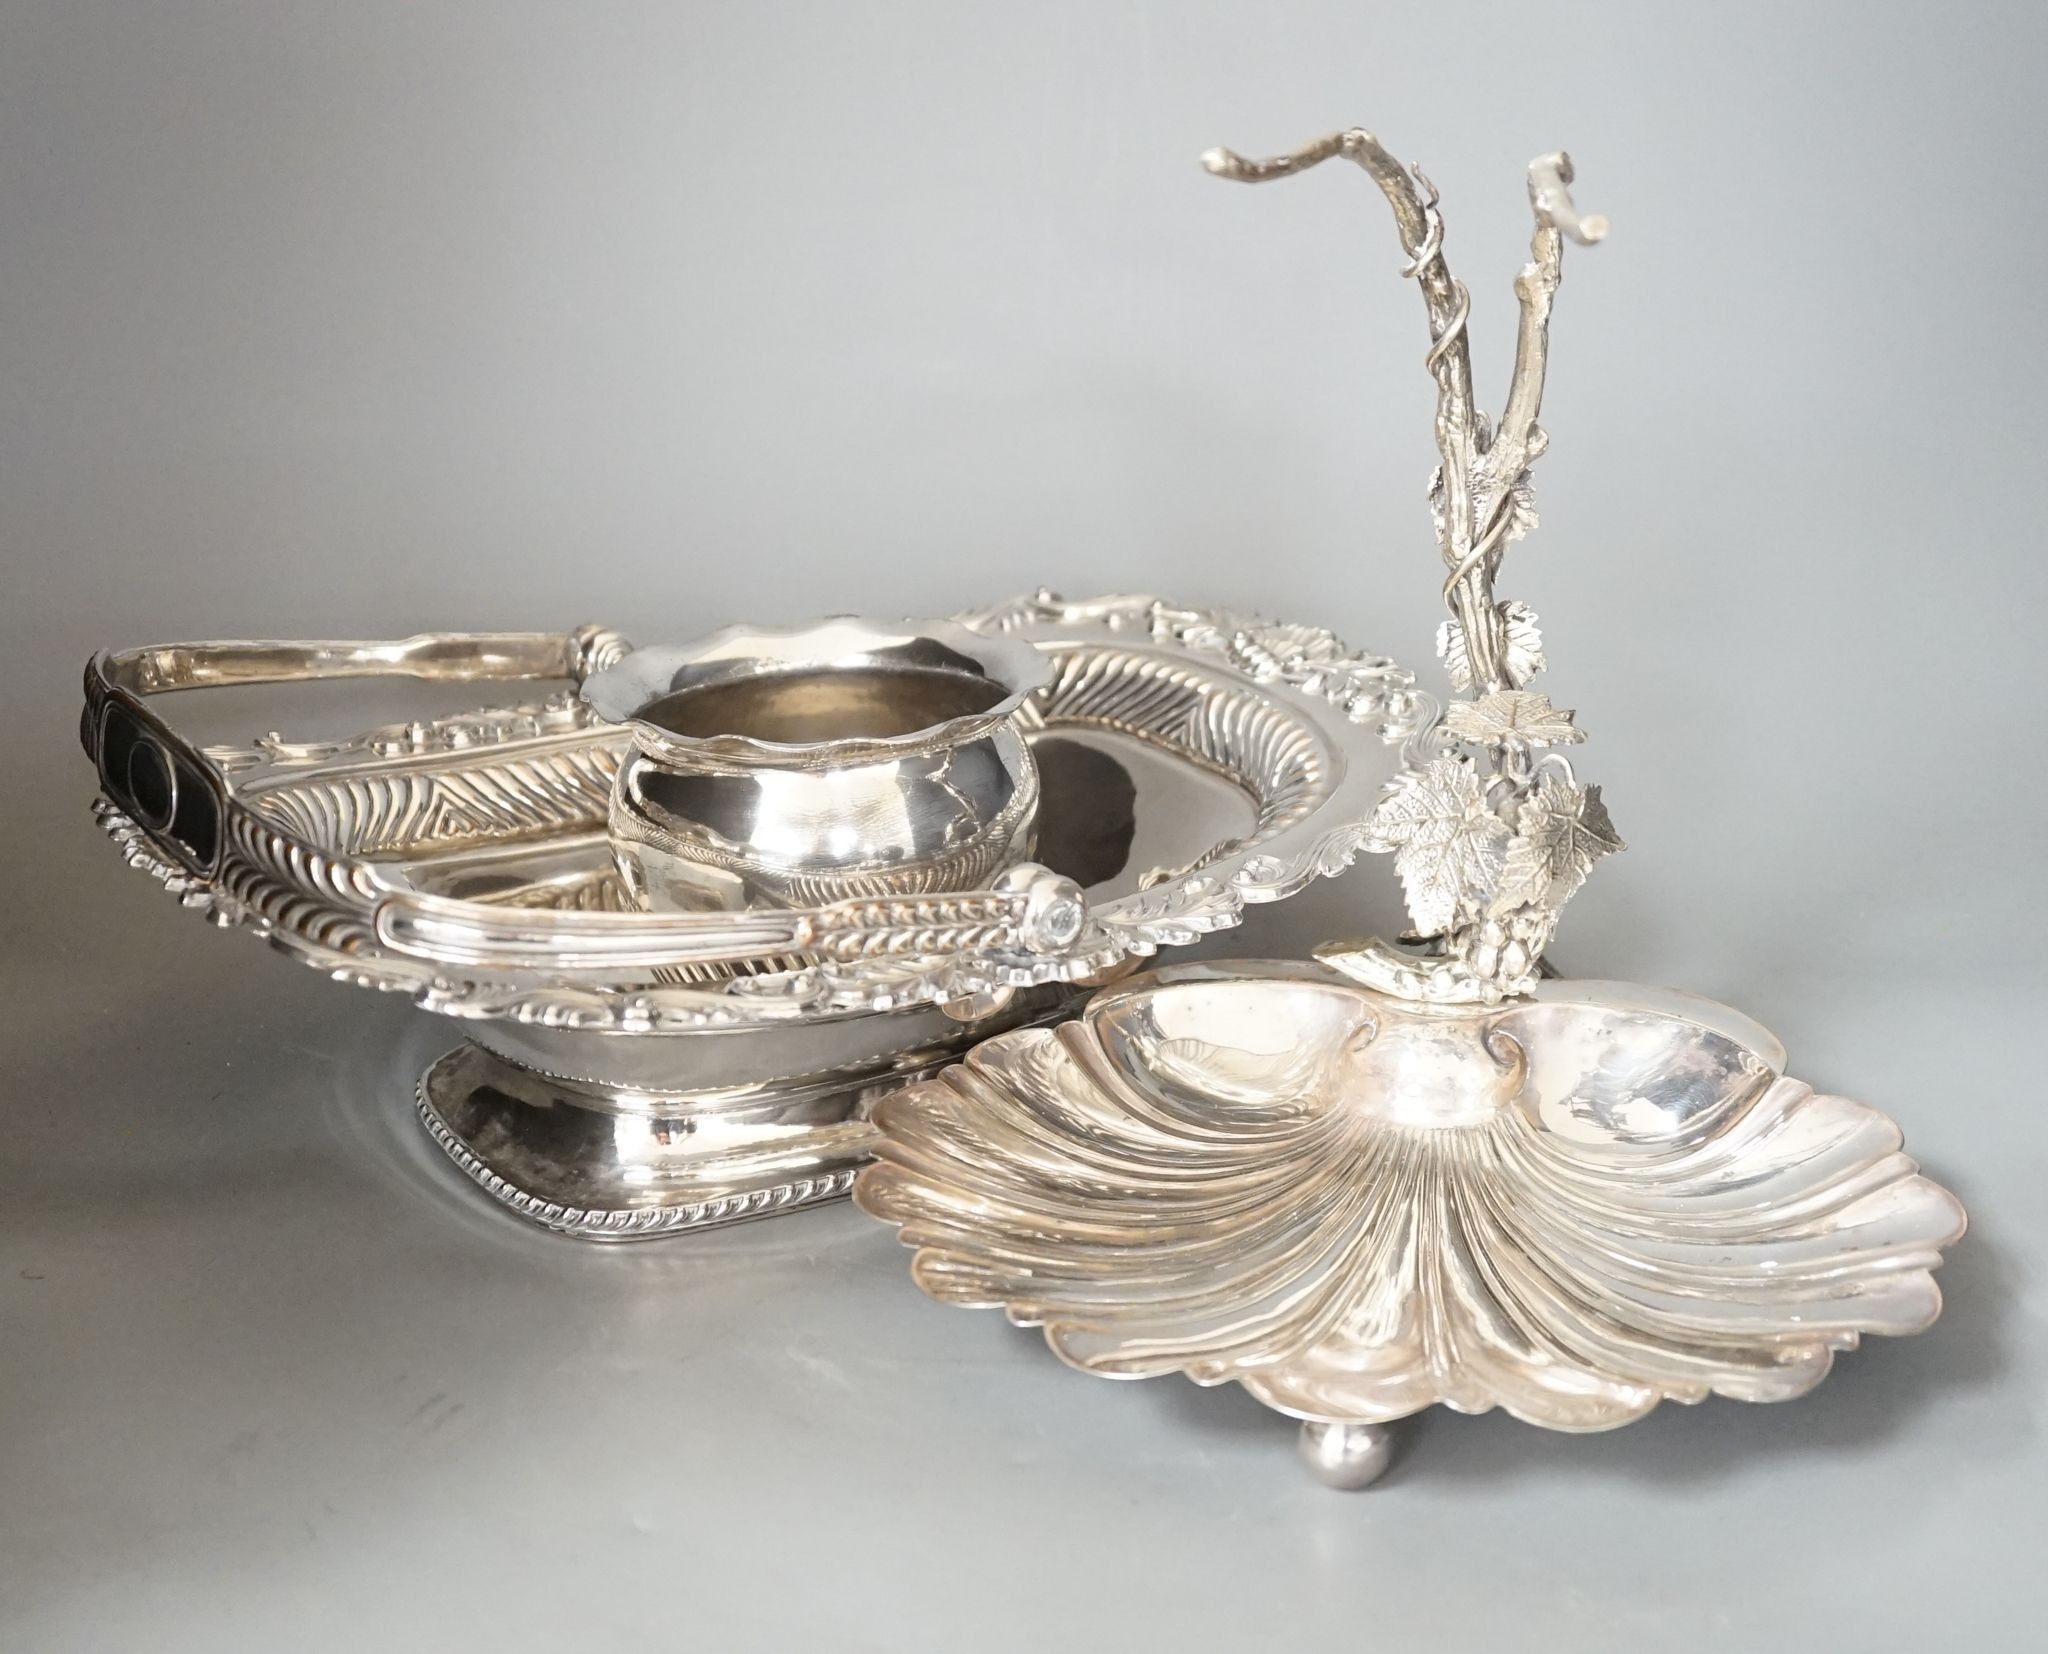 A quantity of plated wares including a breakfast dish, serving dishes etc